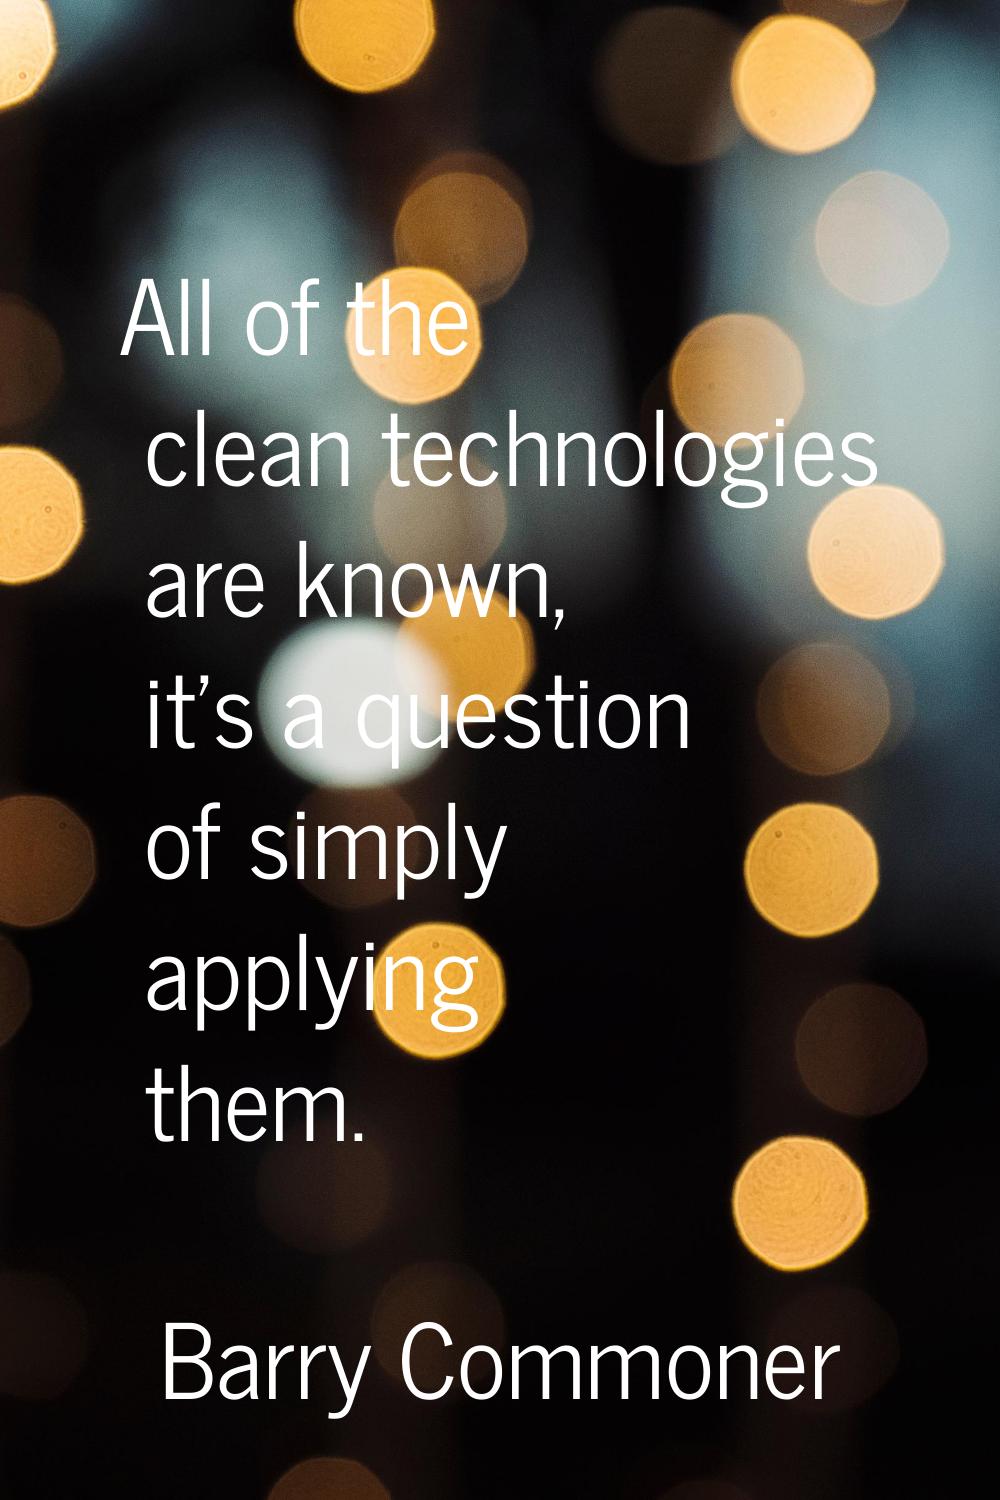 All of the clean technologies are known, it's a question of simply applying them.